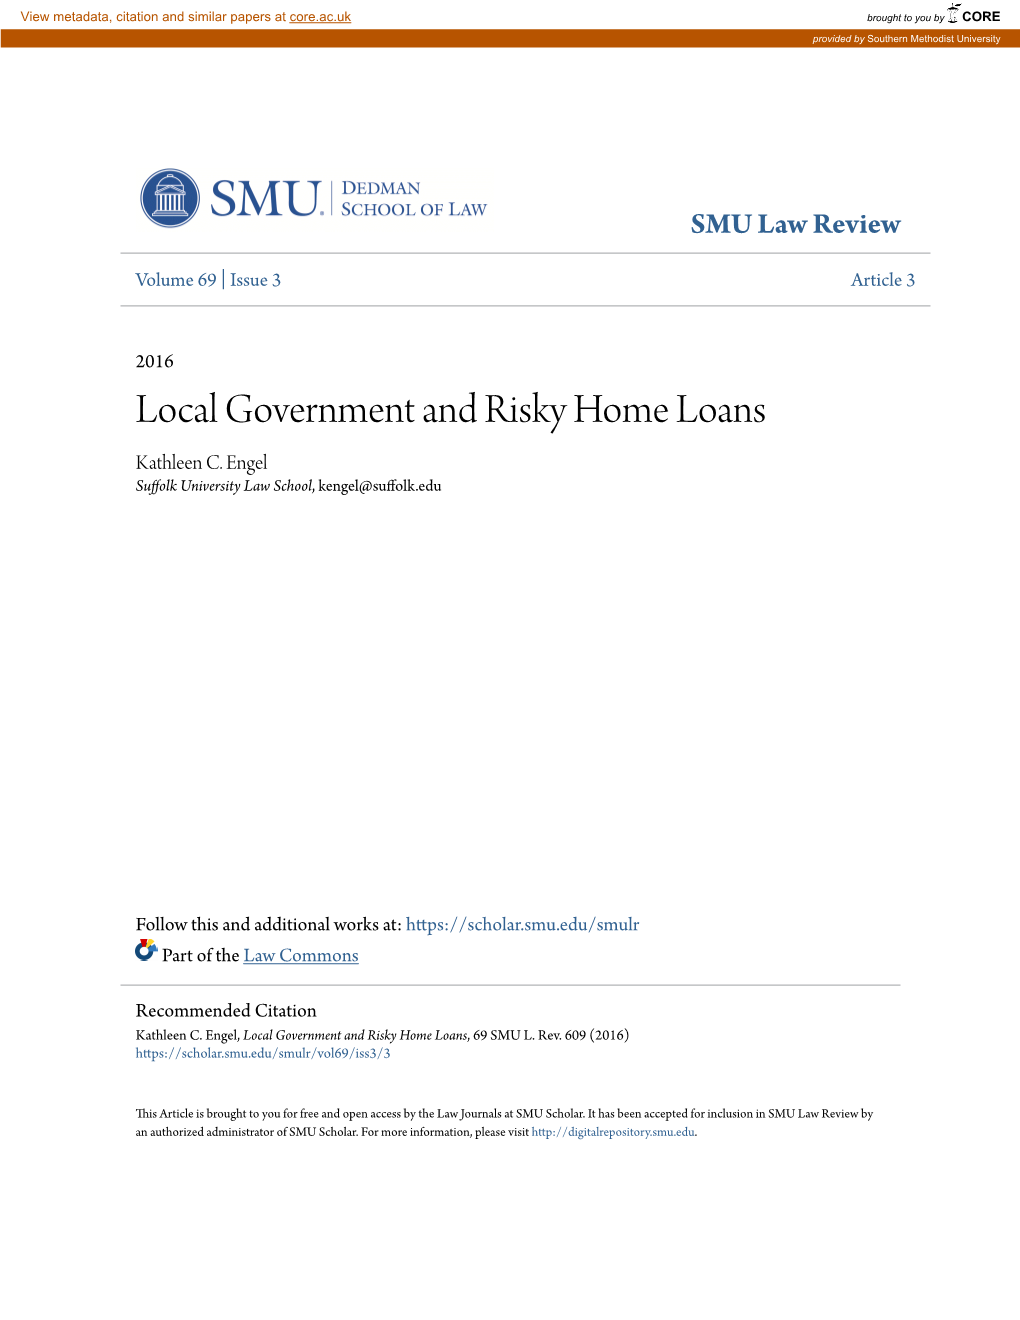 Local Government and Risky Home Loans Kathleen C